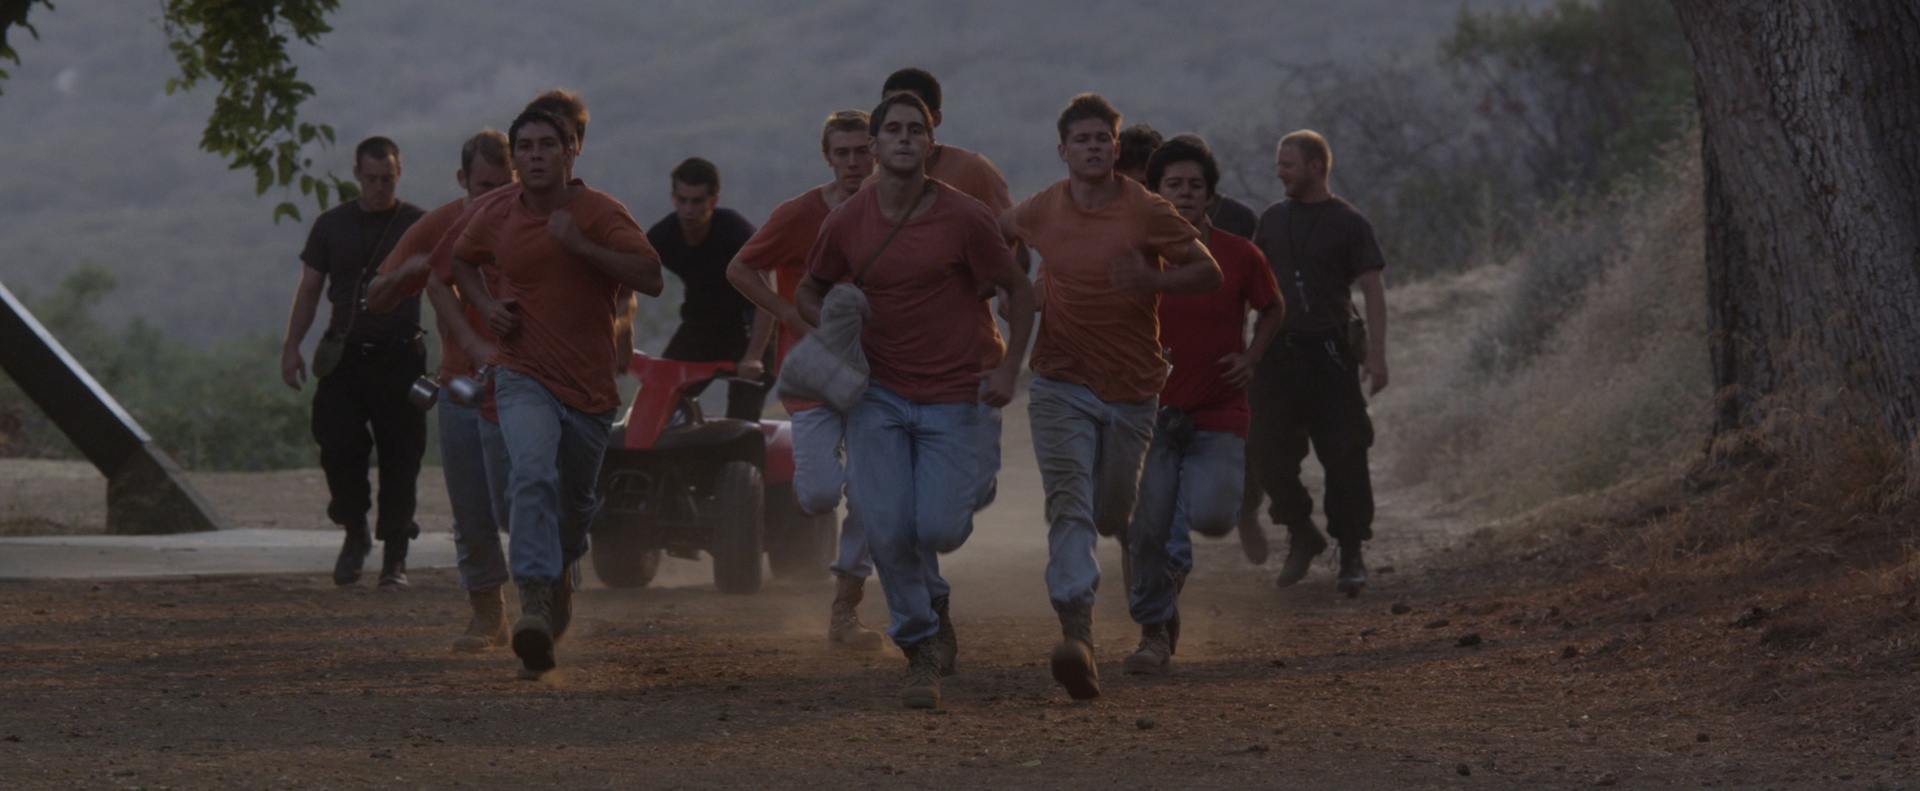 Still of Michael Rousselet, Stephen Todt, Mackenzie Sidwell Graff, Clayton LaDue and P.J. Boudousqué in Coldwater (2013)